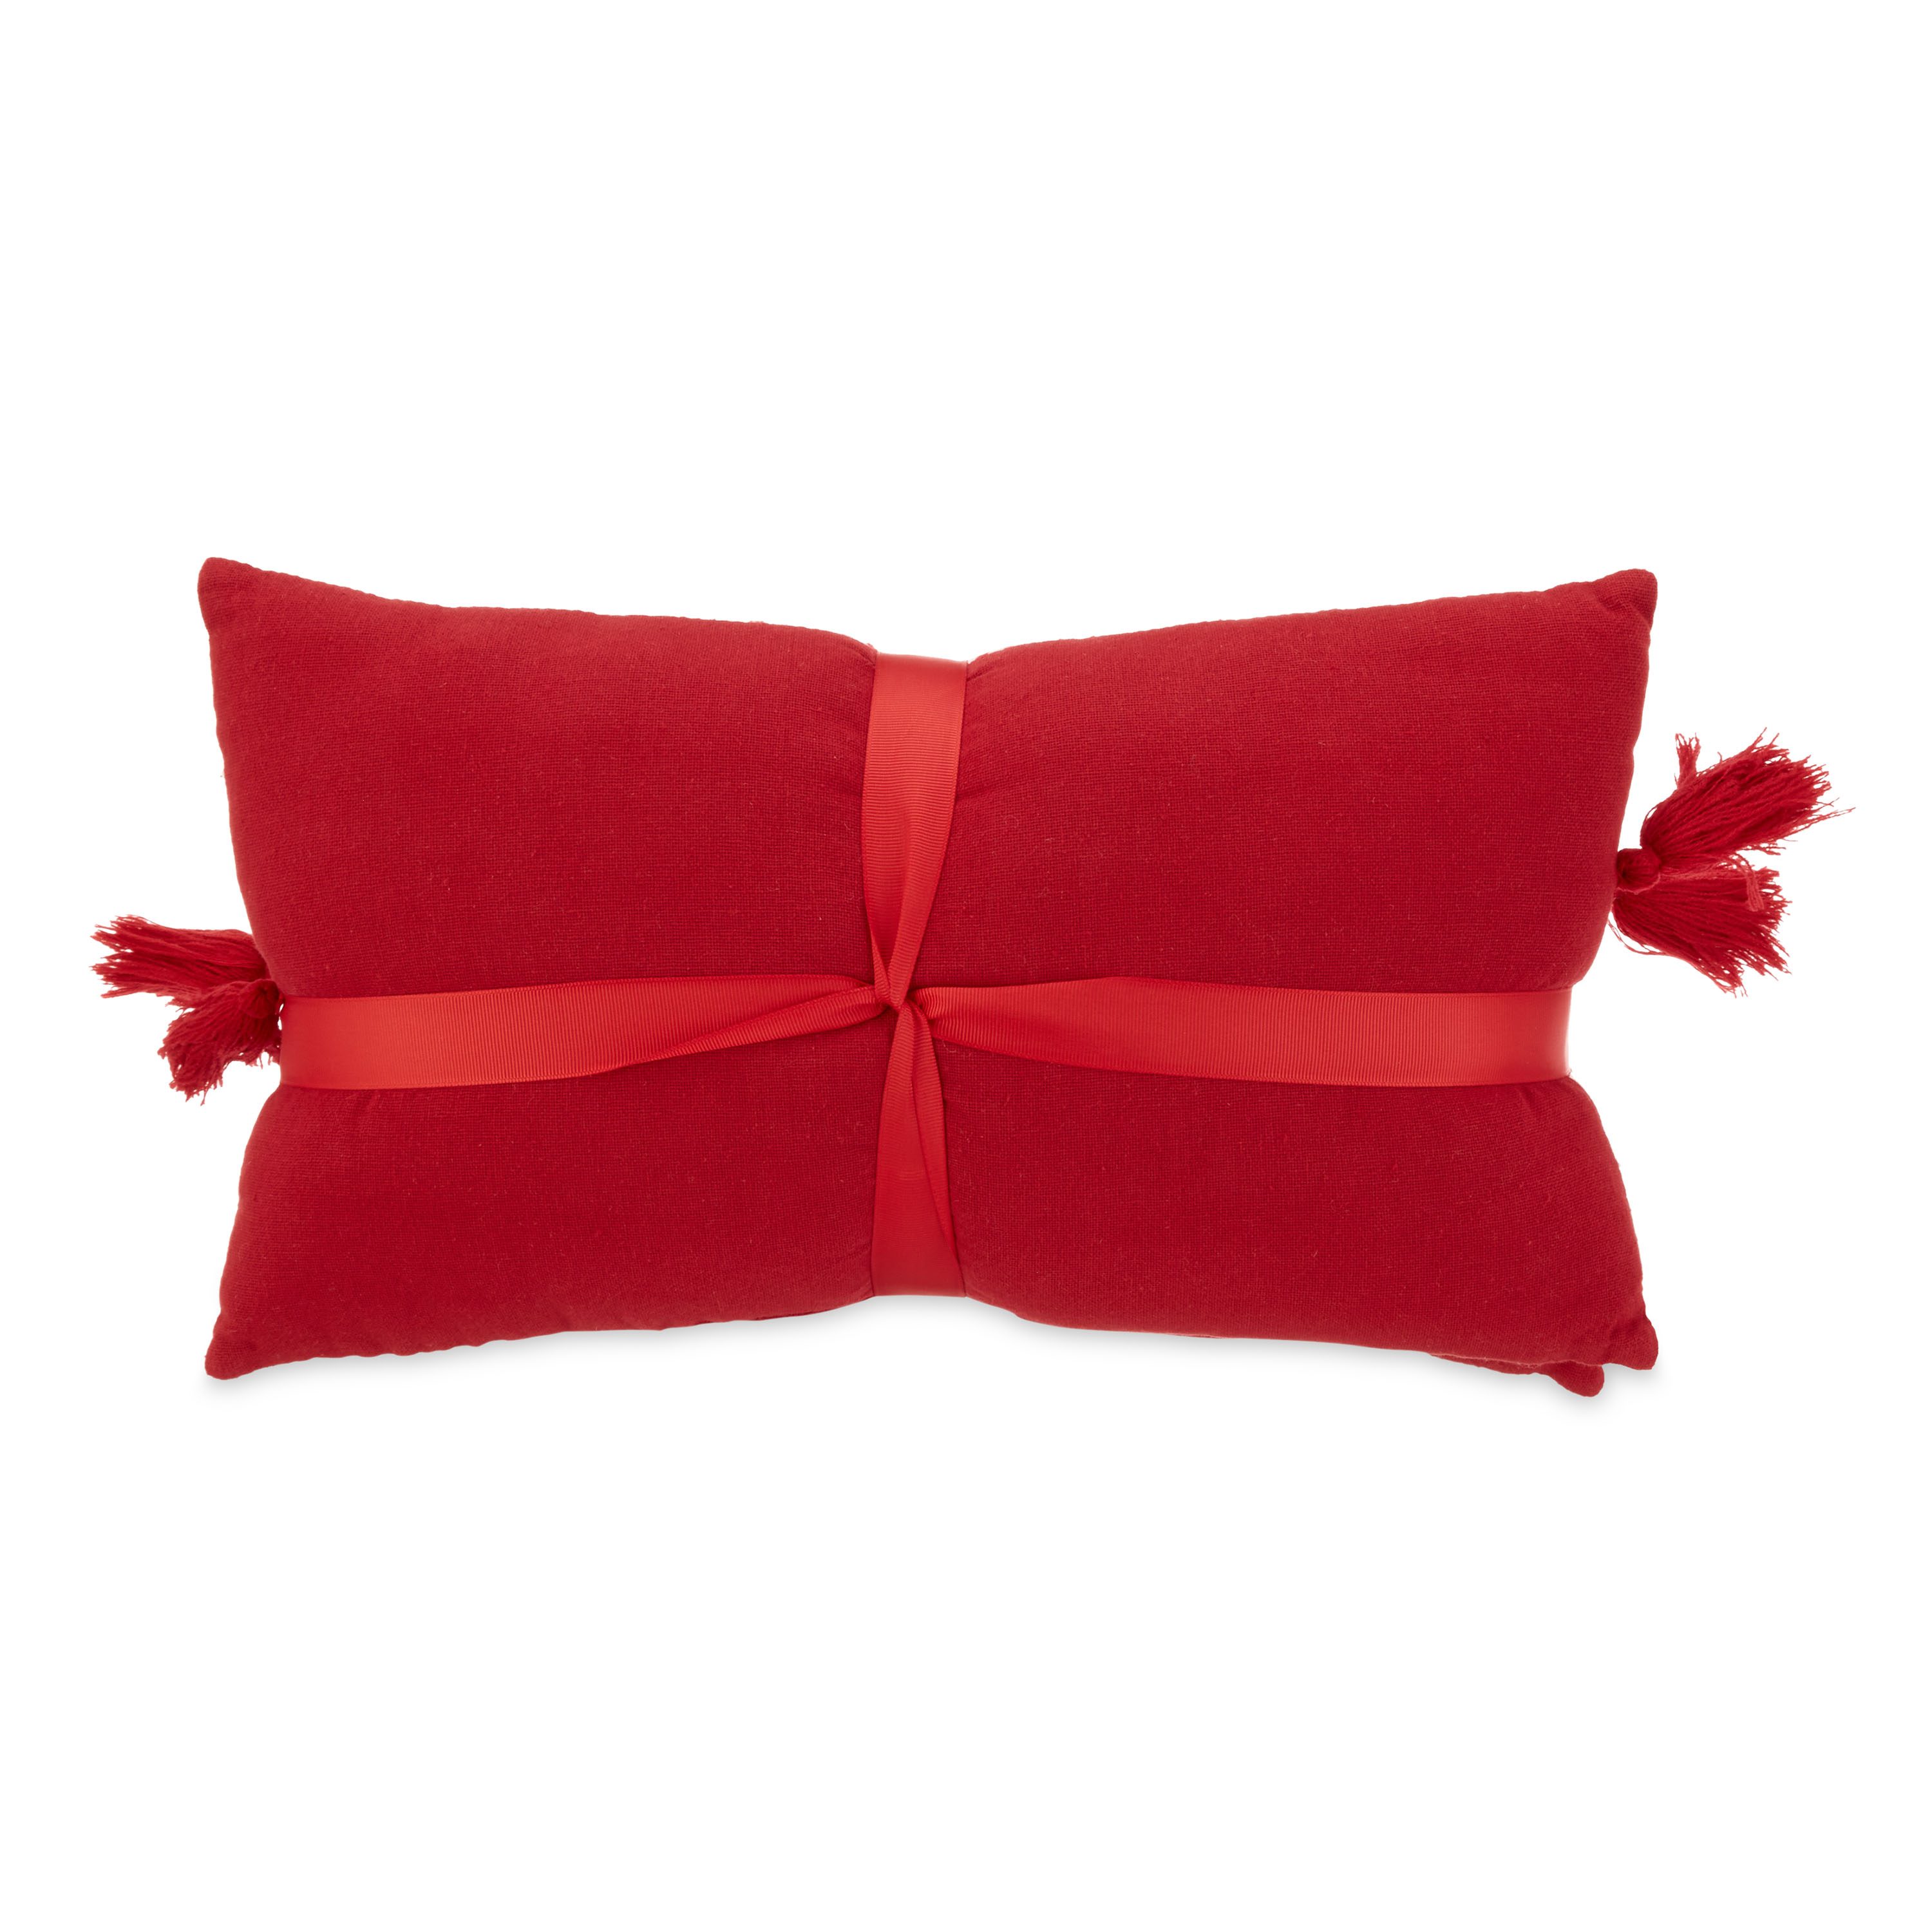 Holiday Time Joy Lumbar Christmas Decorative Pillows, 9x16inch, 2 Count Per Pack - image 5 of 6